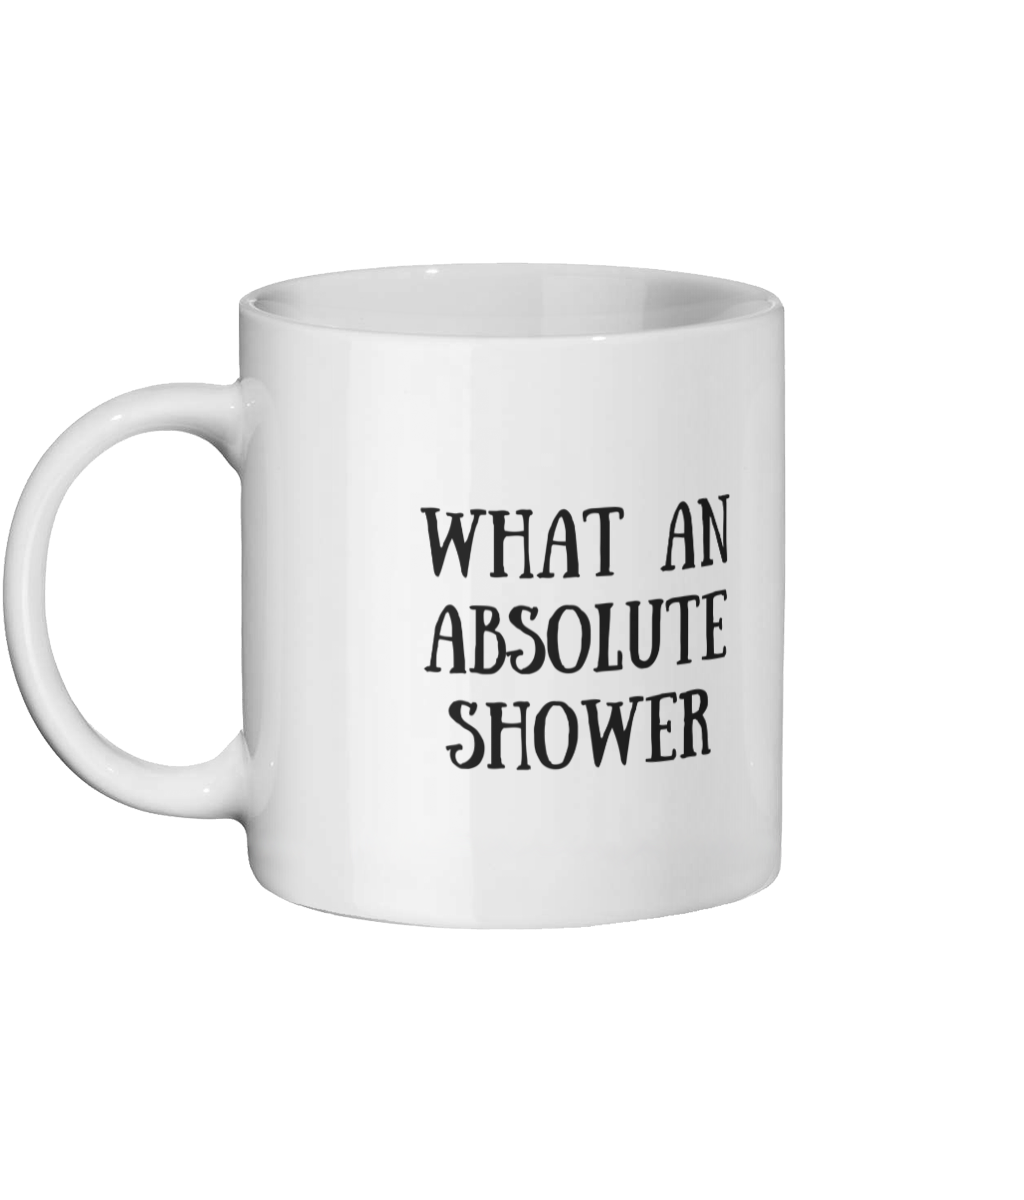 What an absolute shower Mug Left-side